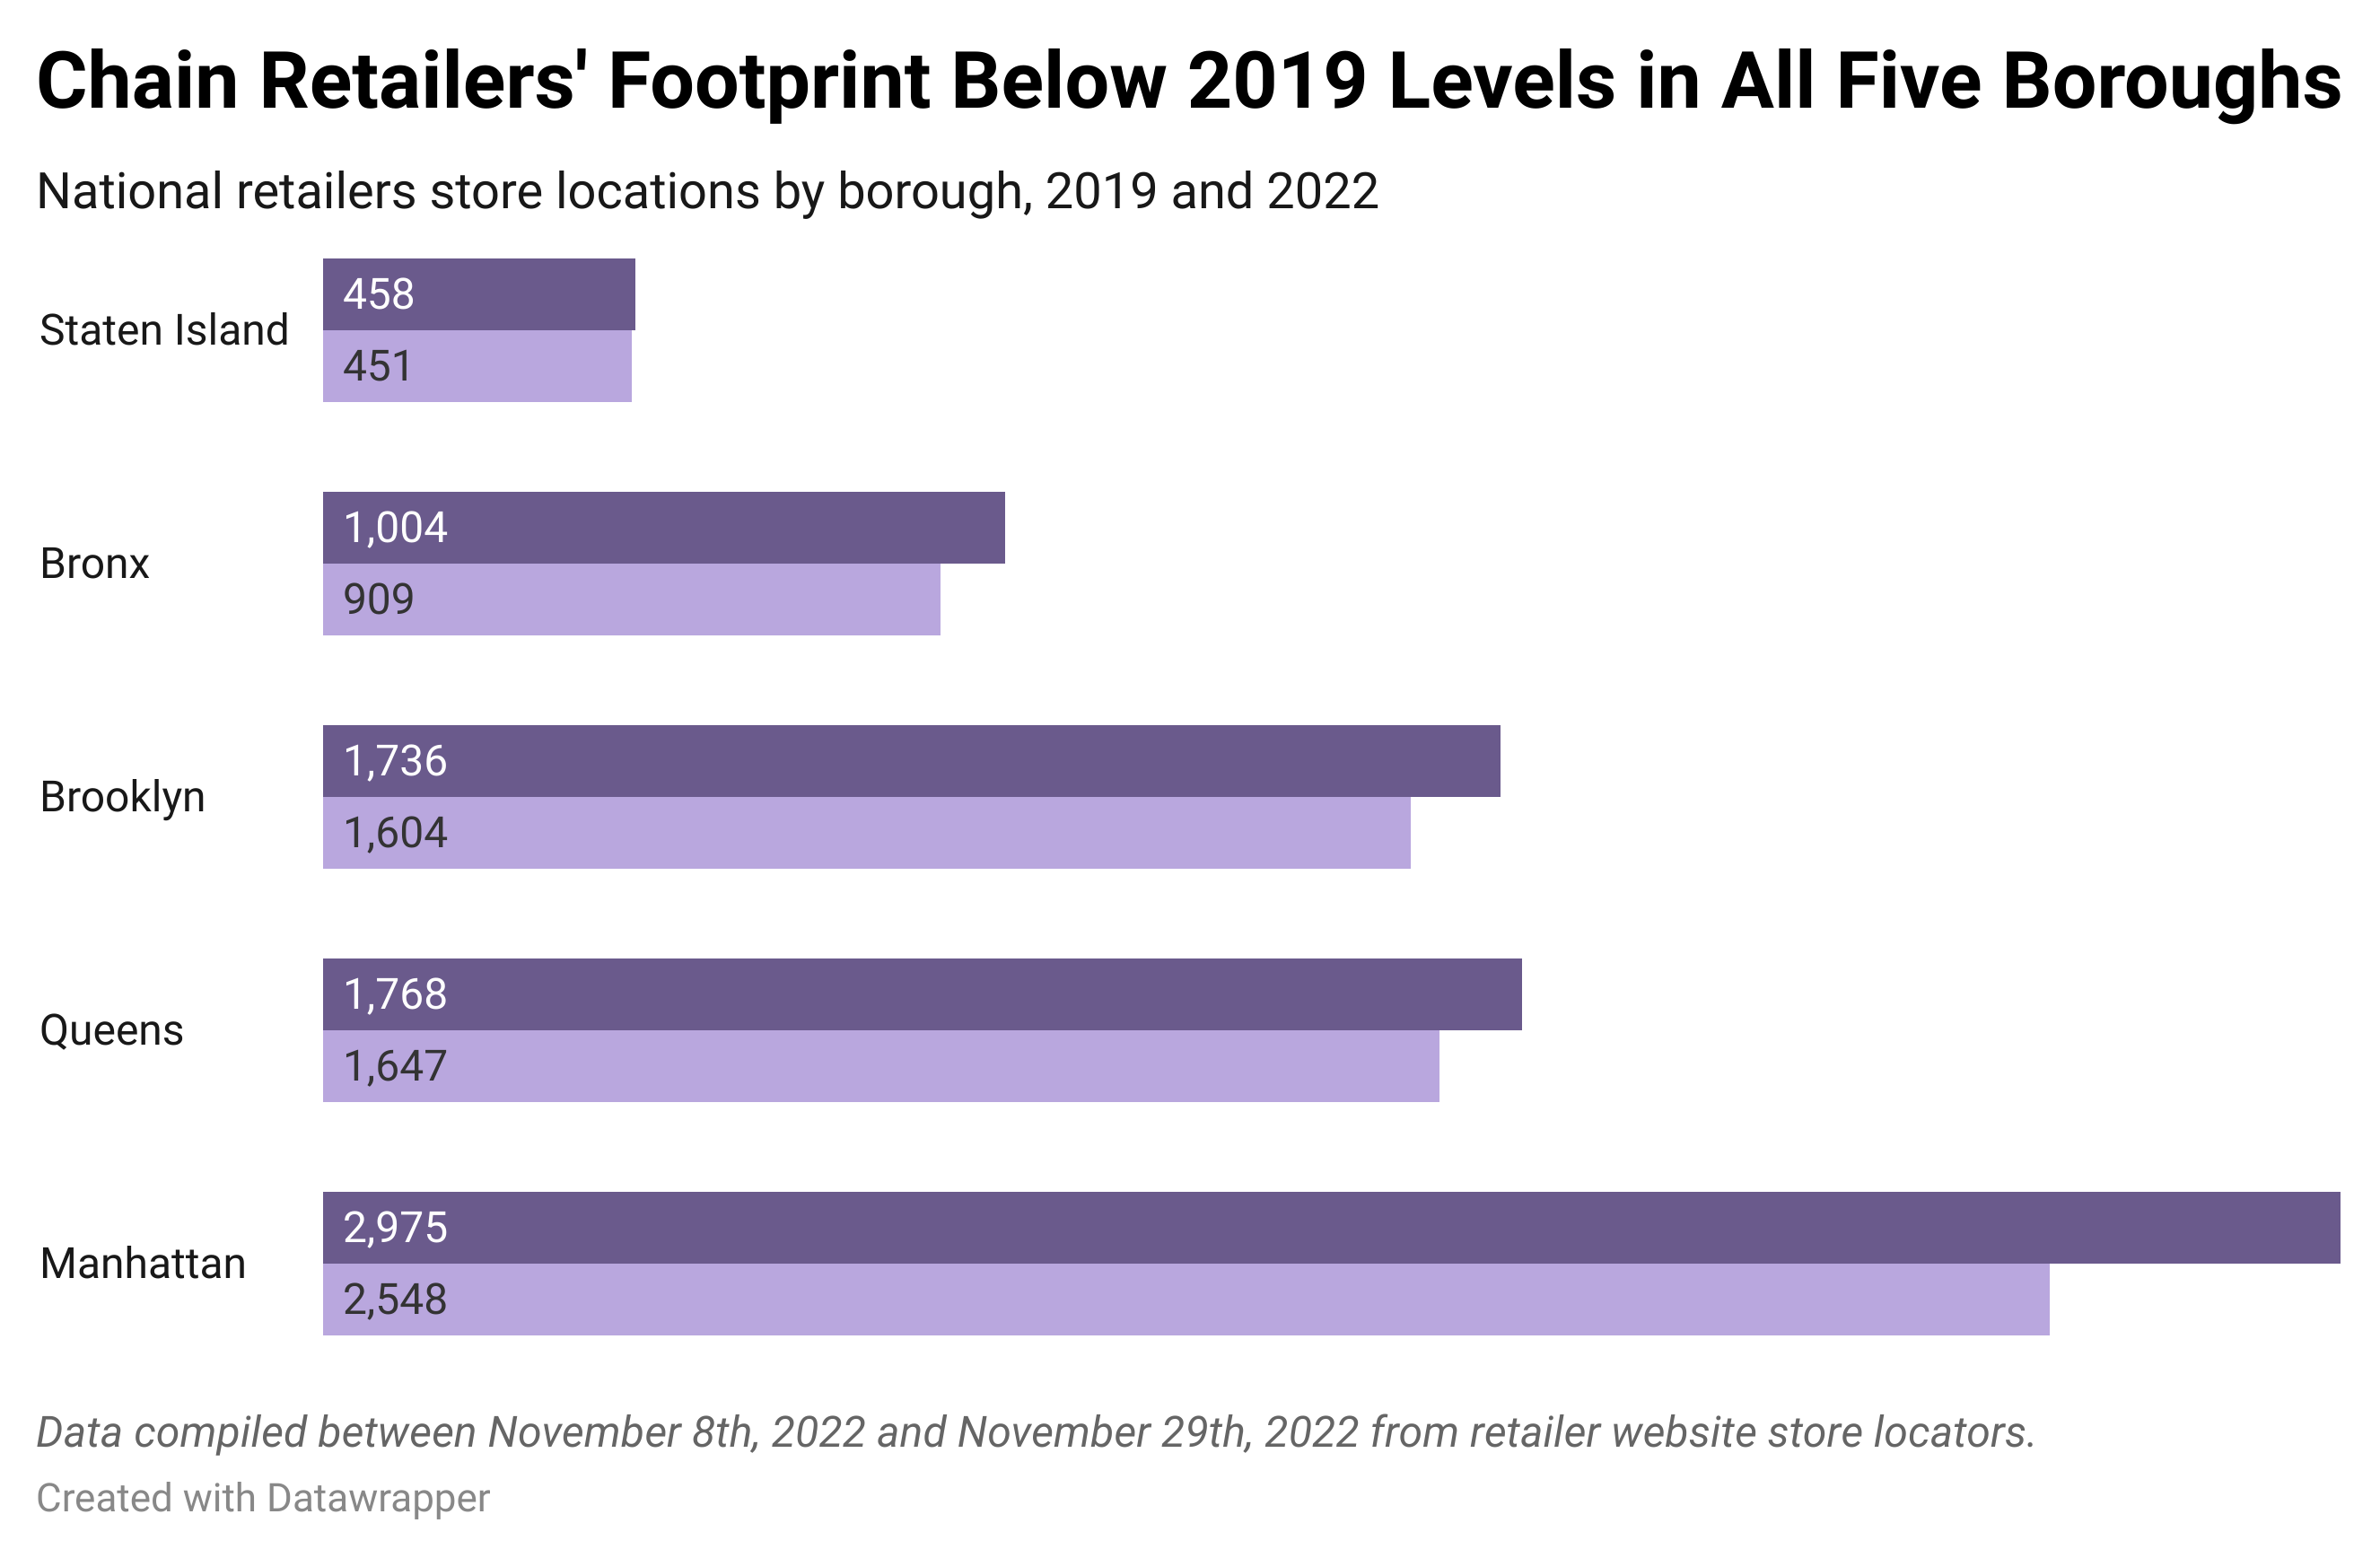 xZELX-chain-retailers-footprint-below-2019-levels-in-all-five-boroughs.png